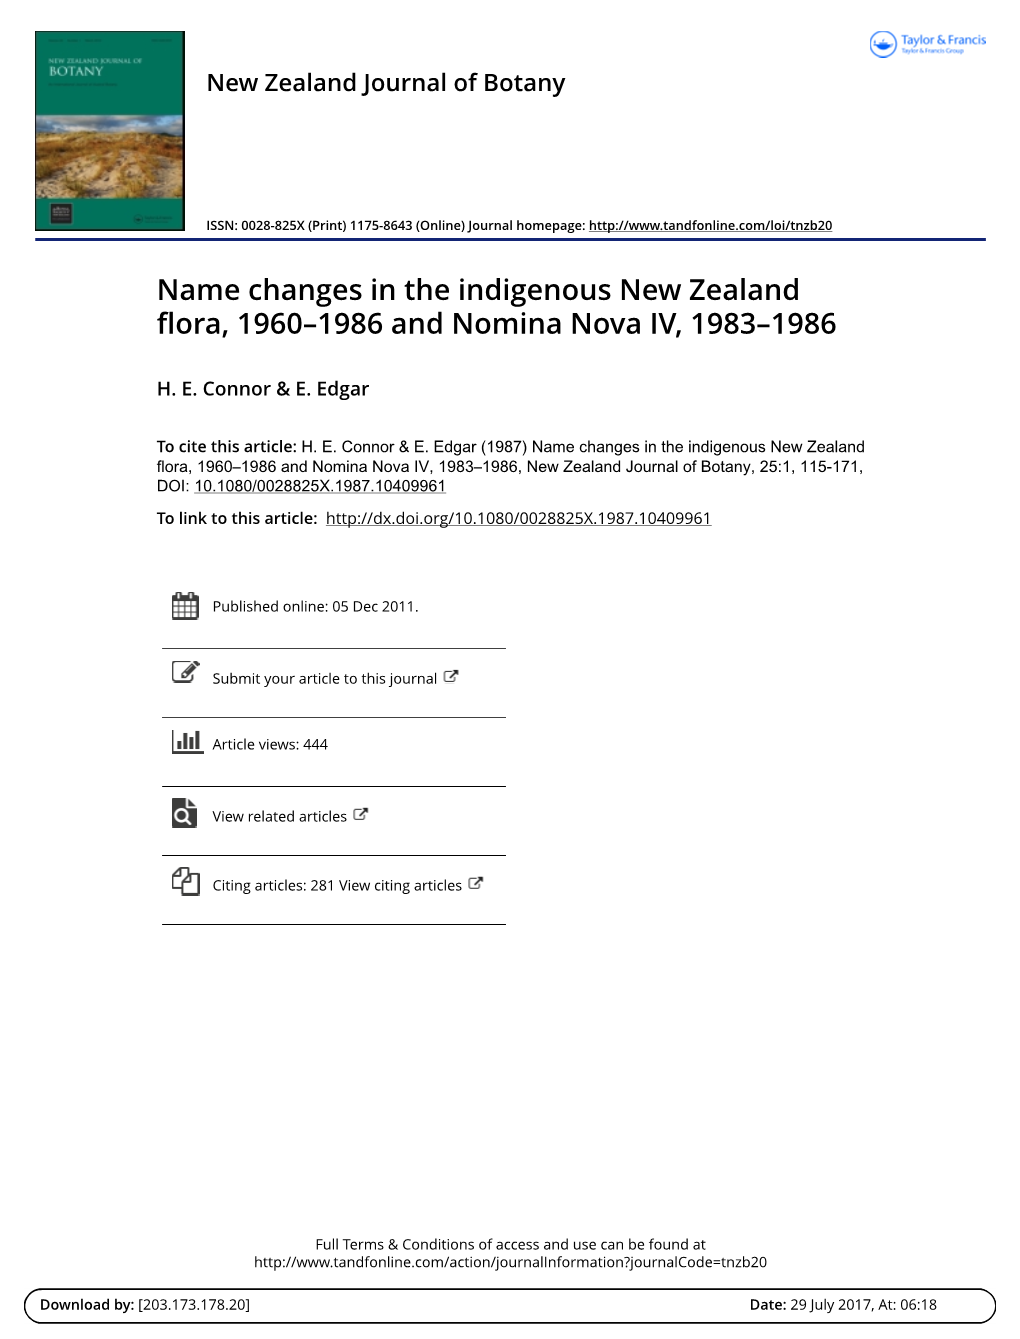 Name Changes in the Indigenous New Zealand Flora, 1960–1986 and Nomina Nova IV, 1983–1986